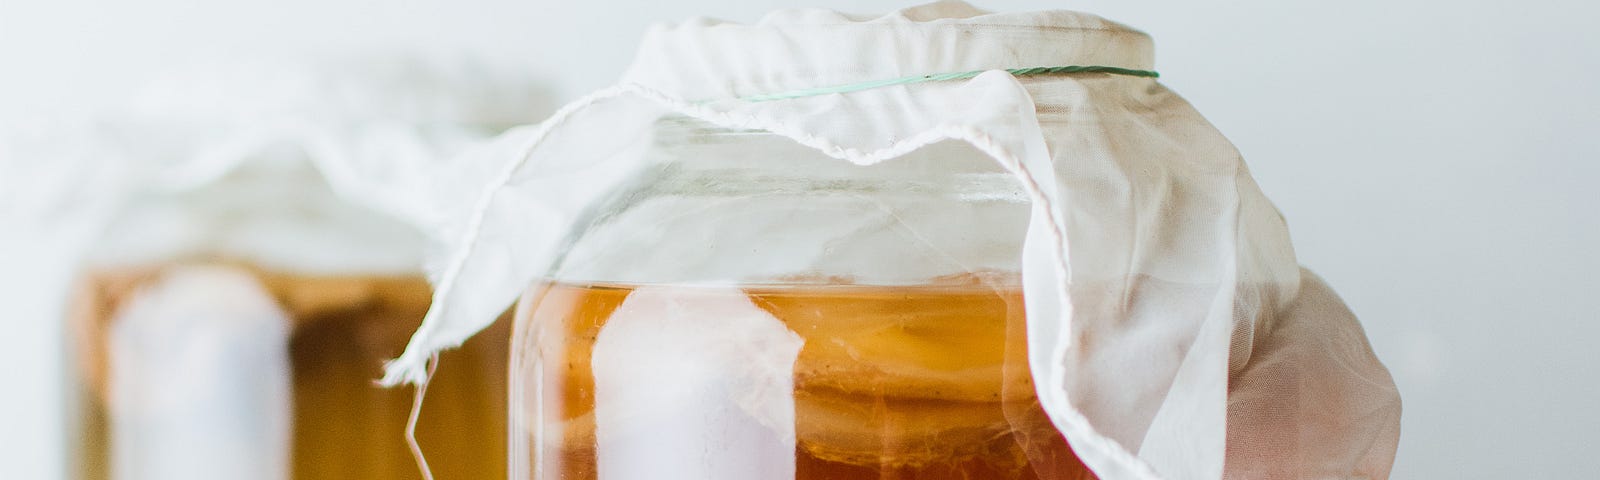 Two glass jars of fermented tea